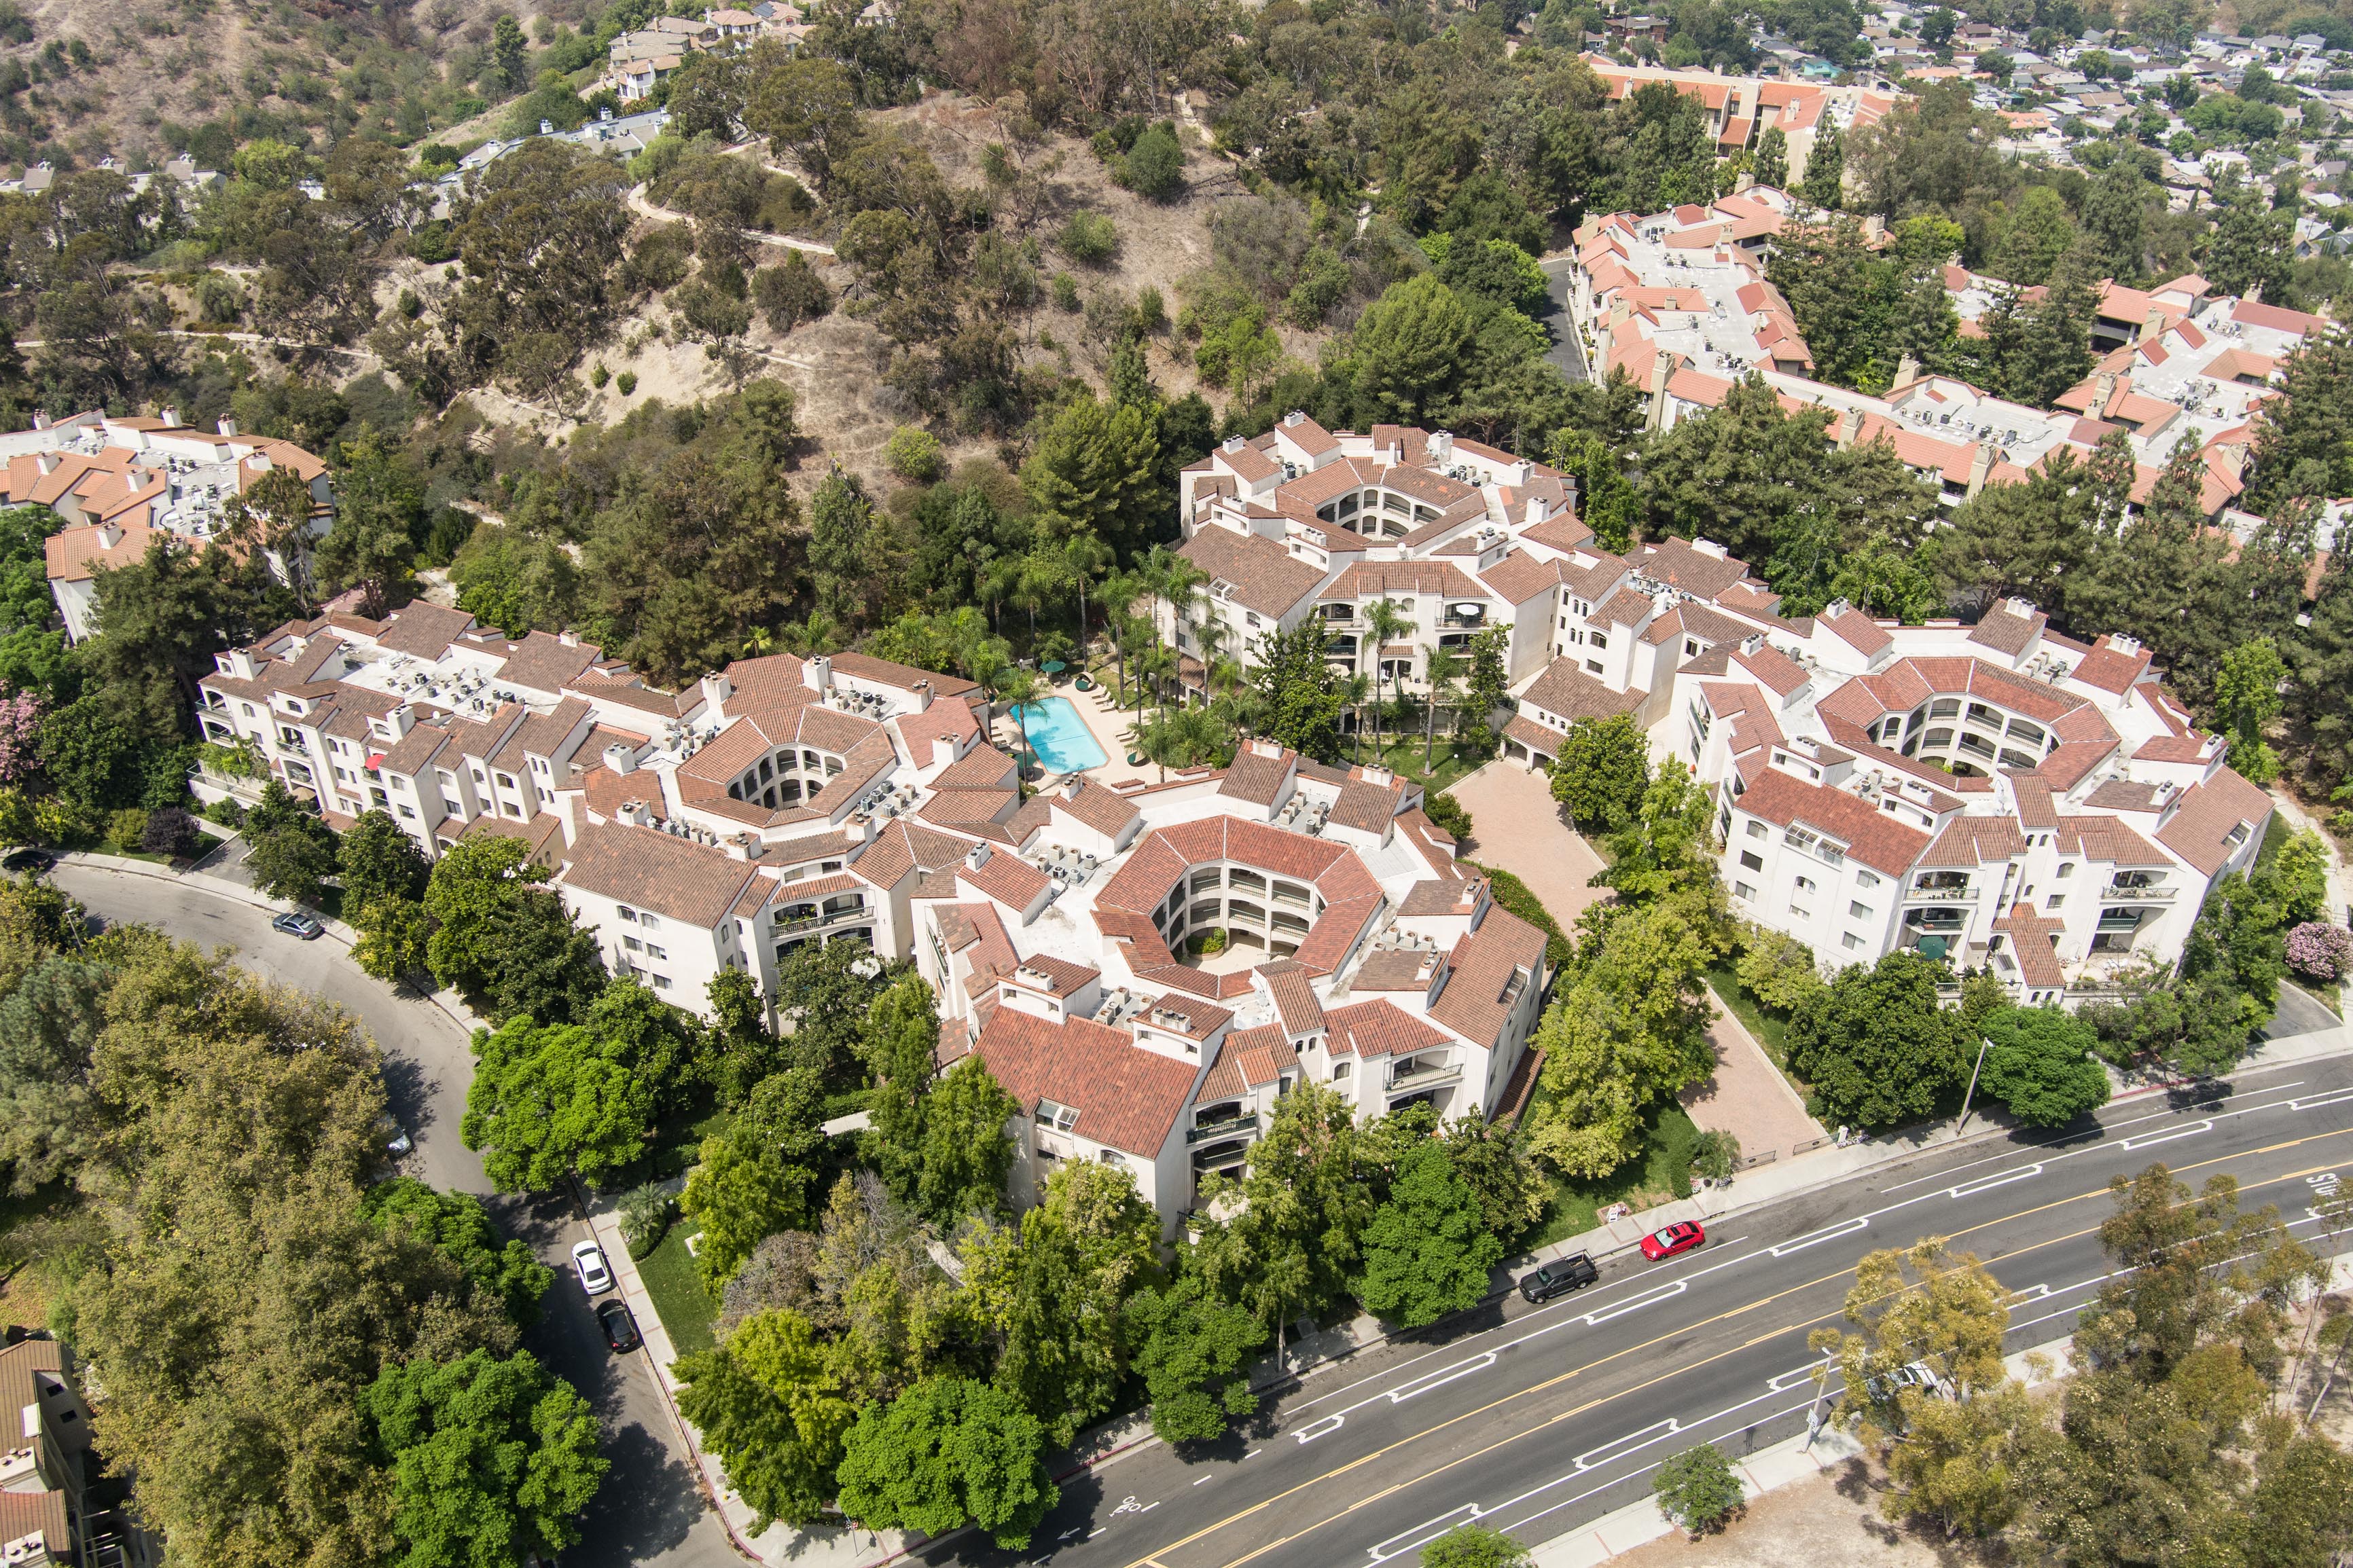 Aerial view of condos Drone photography